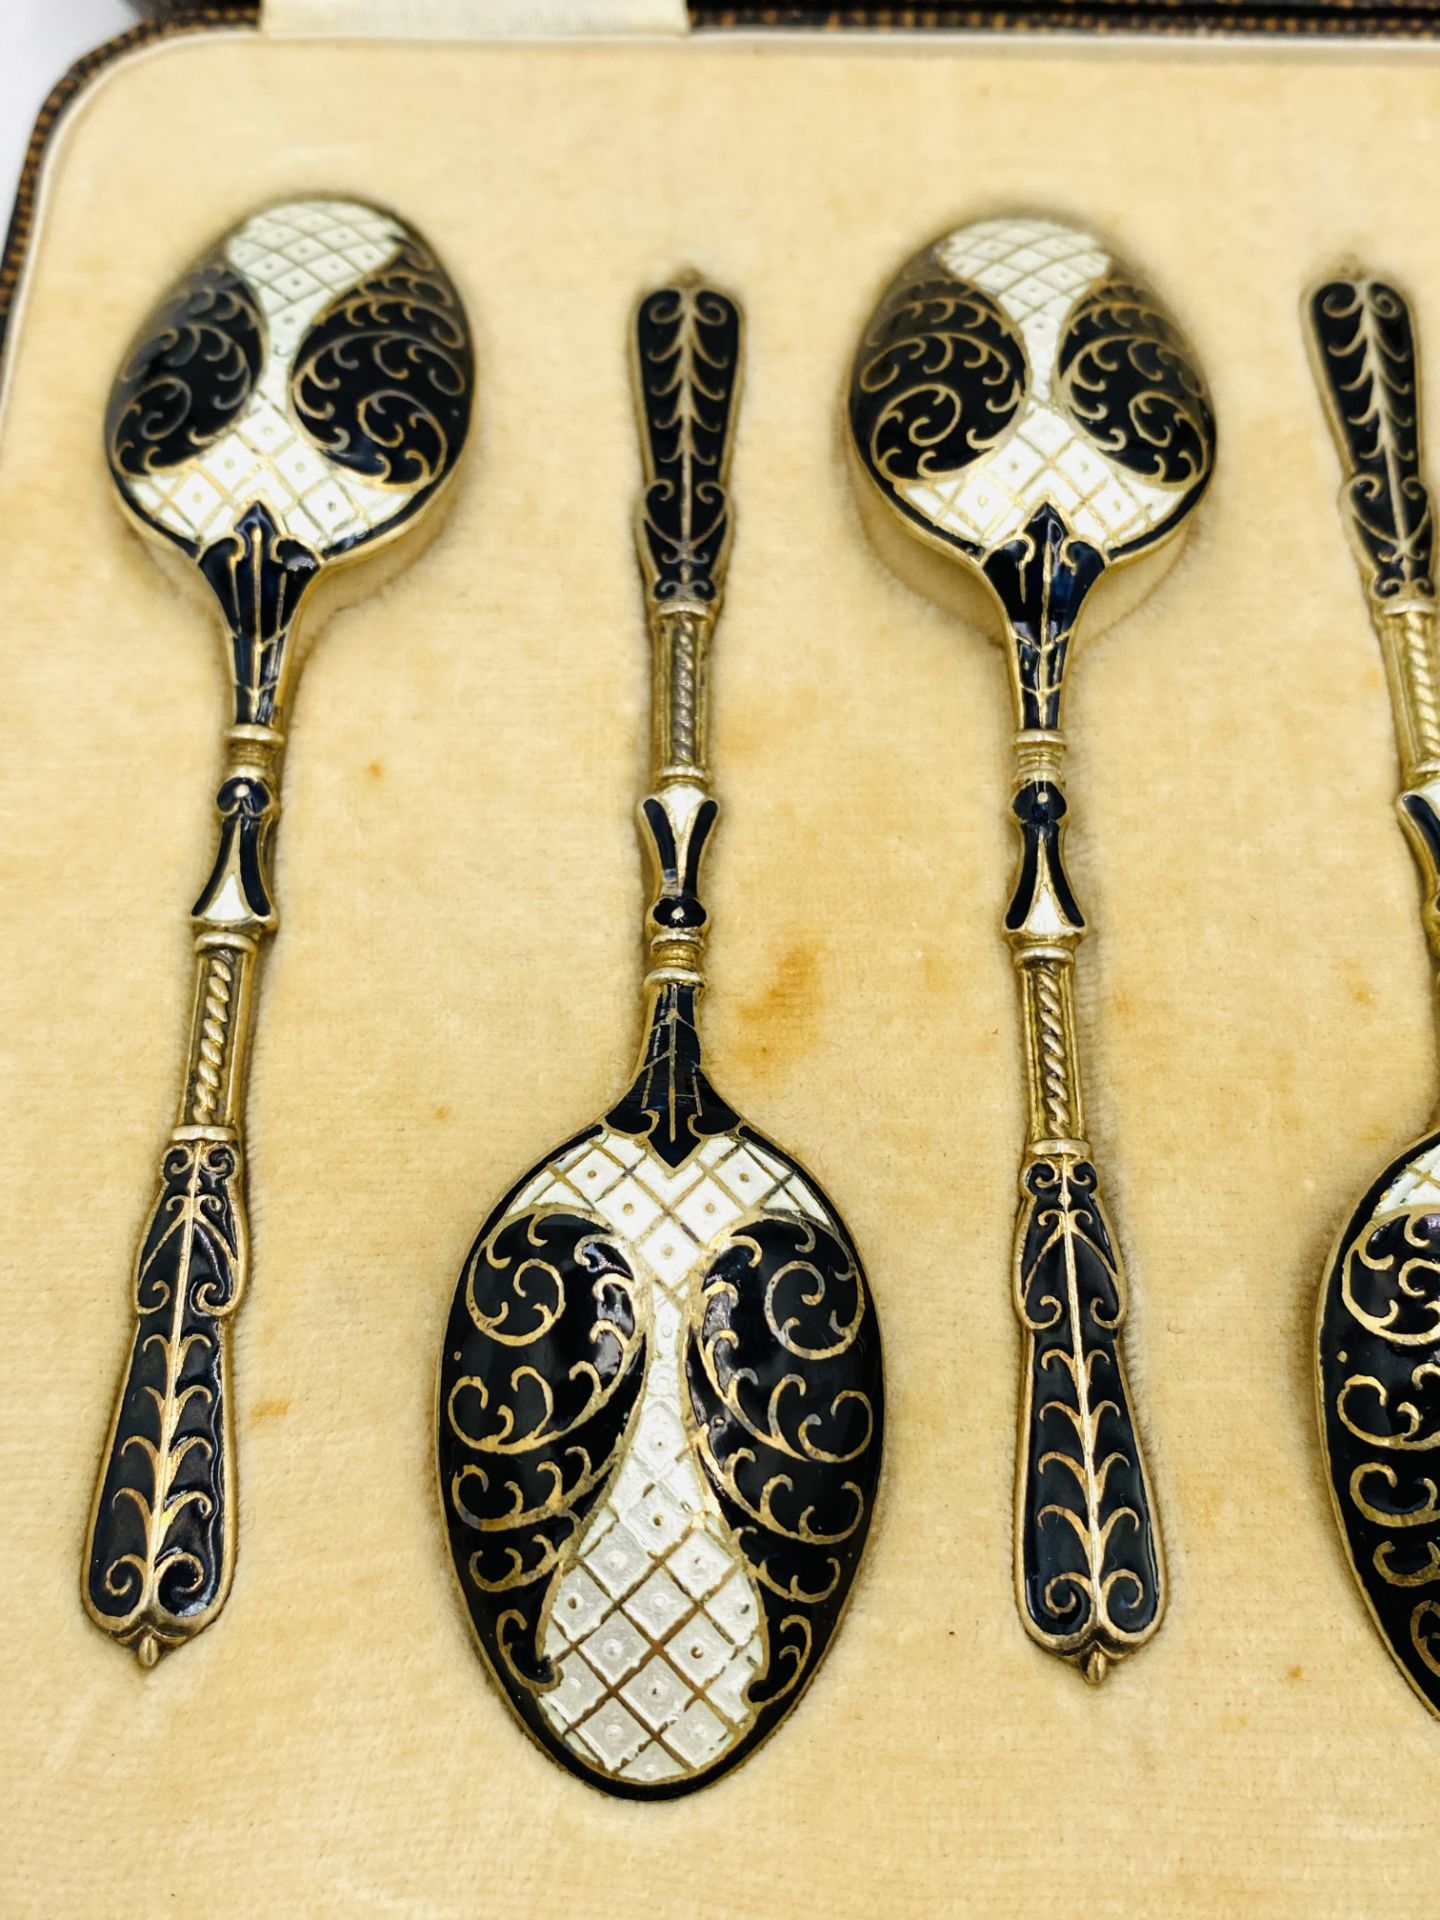 Boxed set of six silver and enamel tea spoons - Image 4 of 5